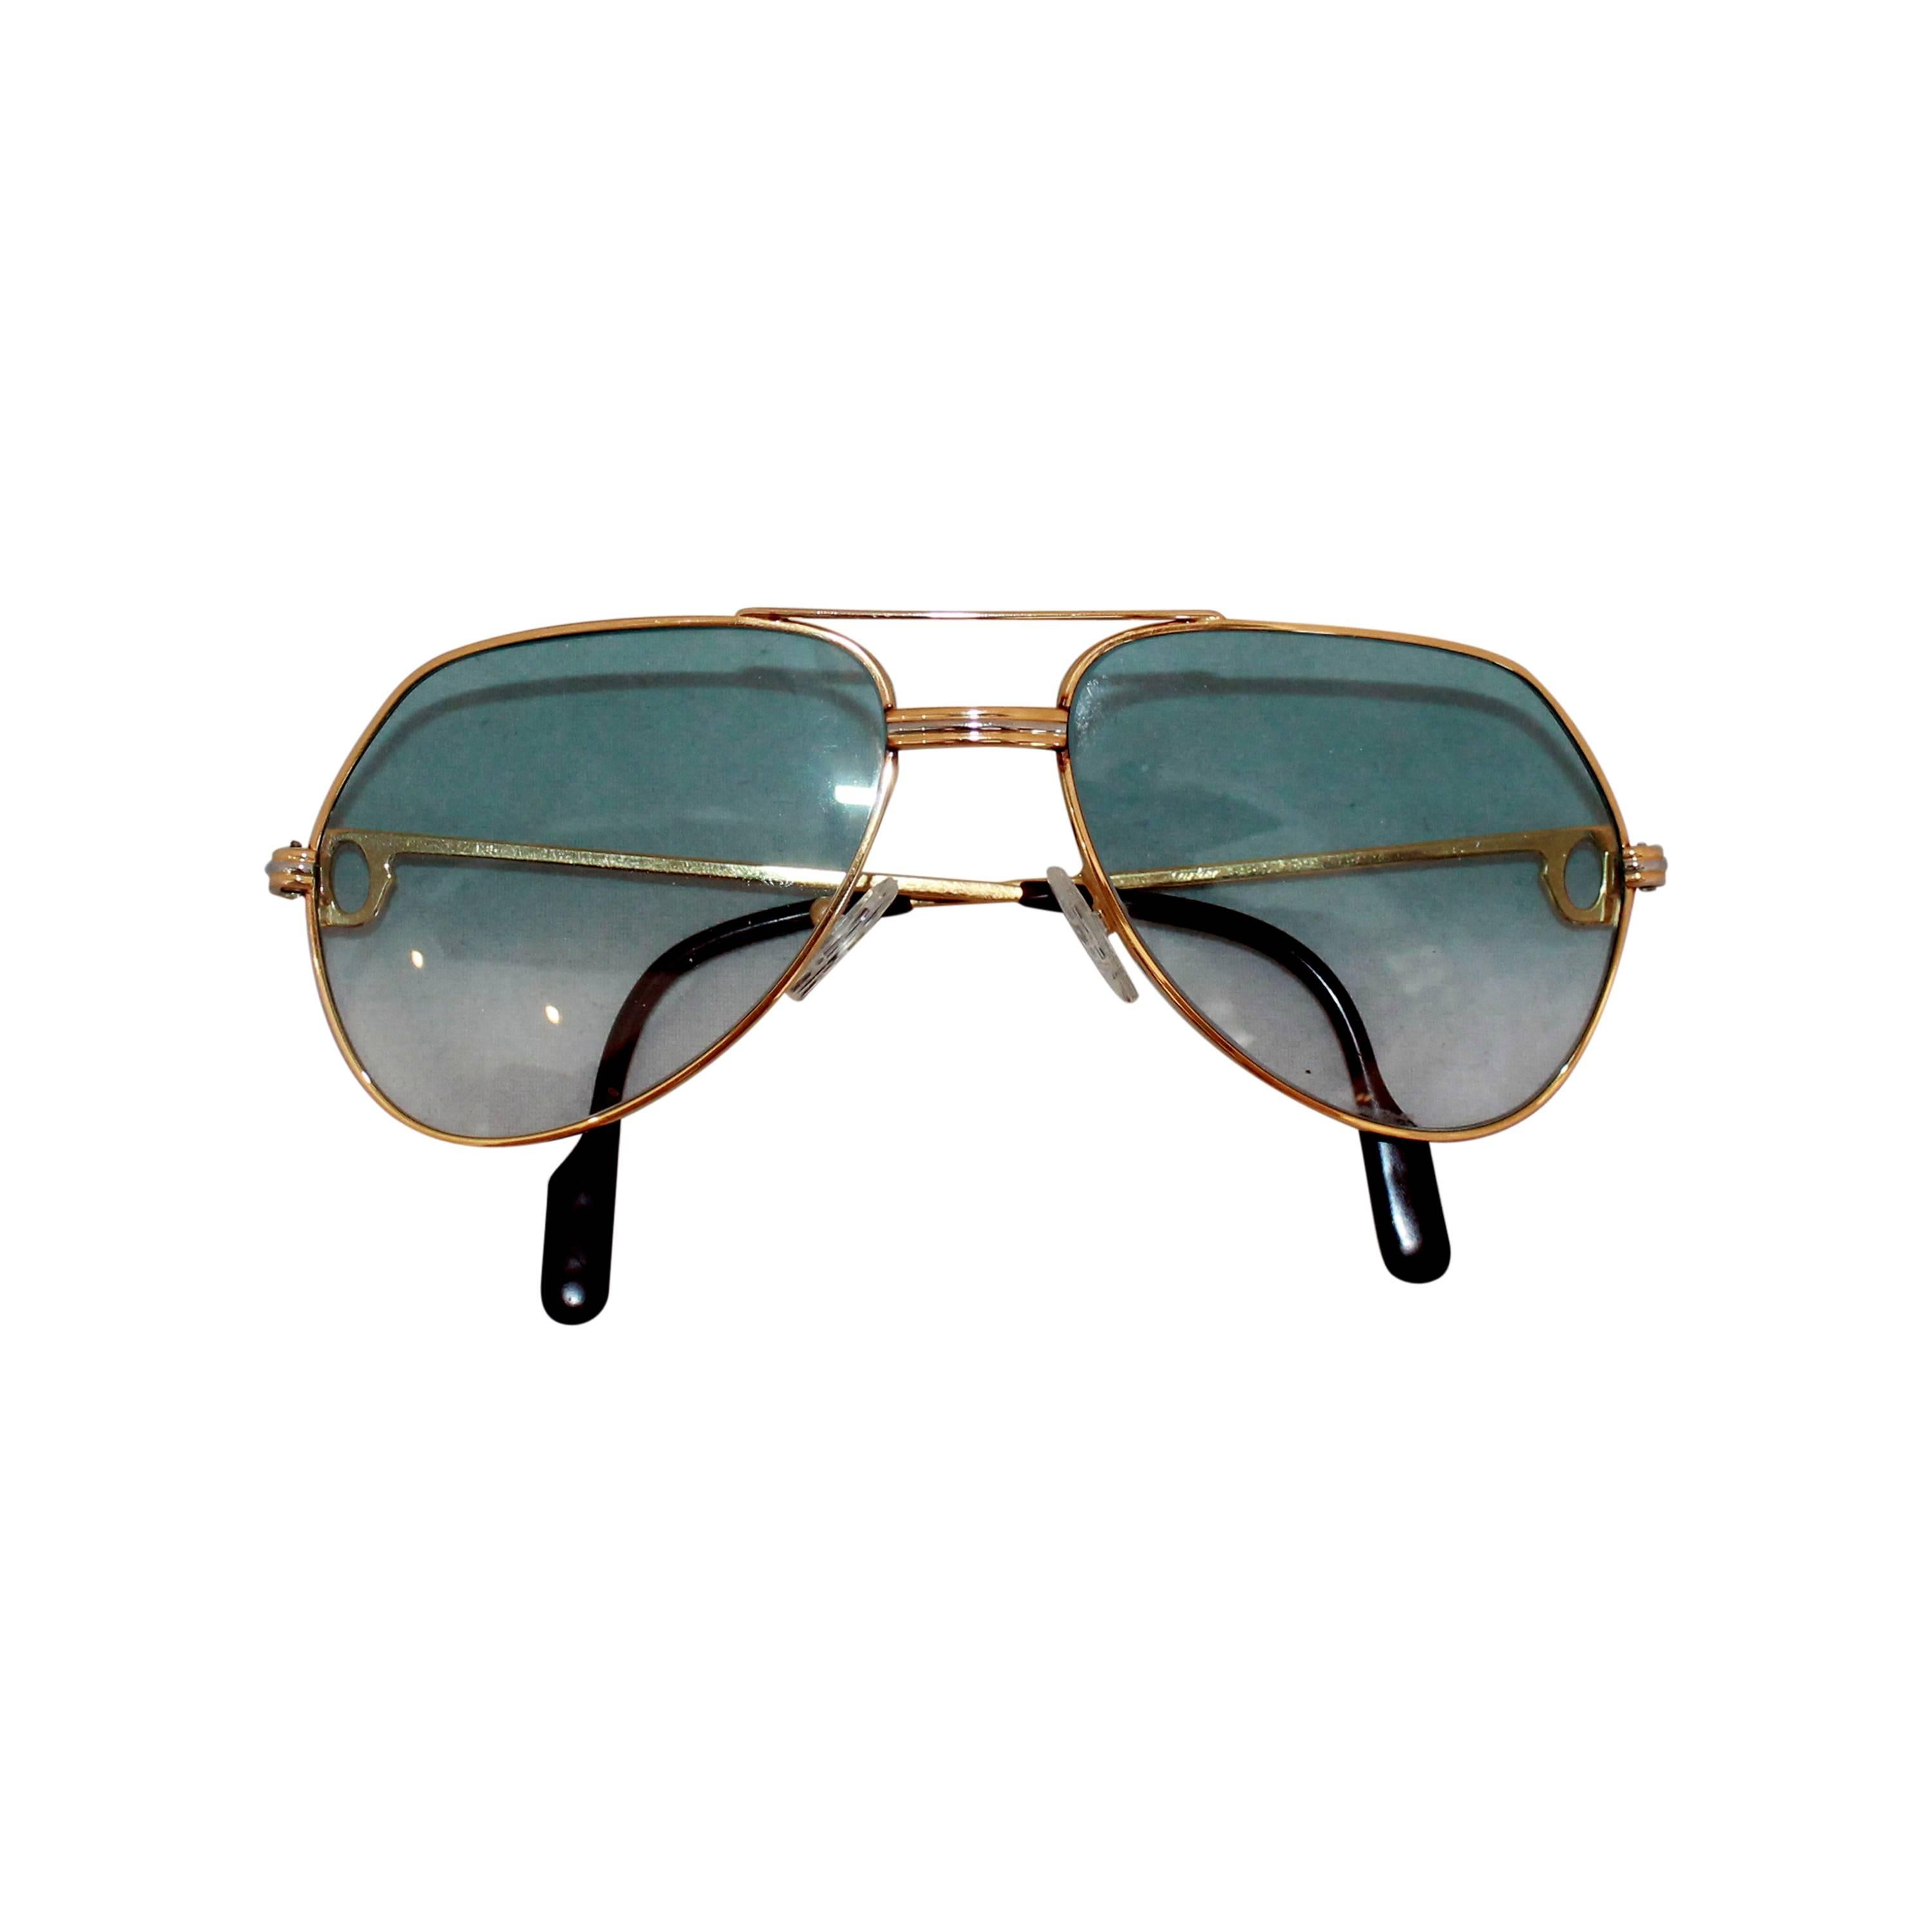 Cartier Gold Rimmed Aviator-Style Sunglasses w/ Blue Faded Lenses